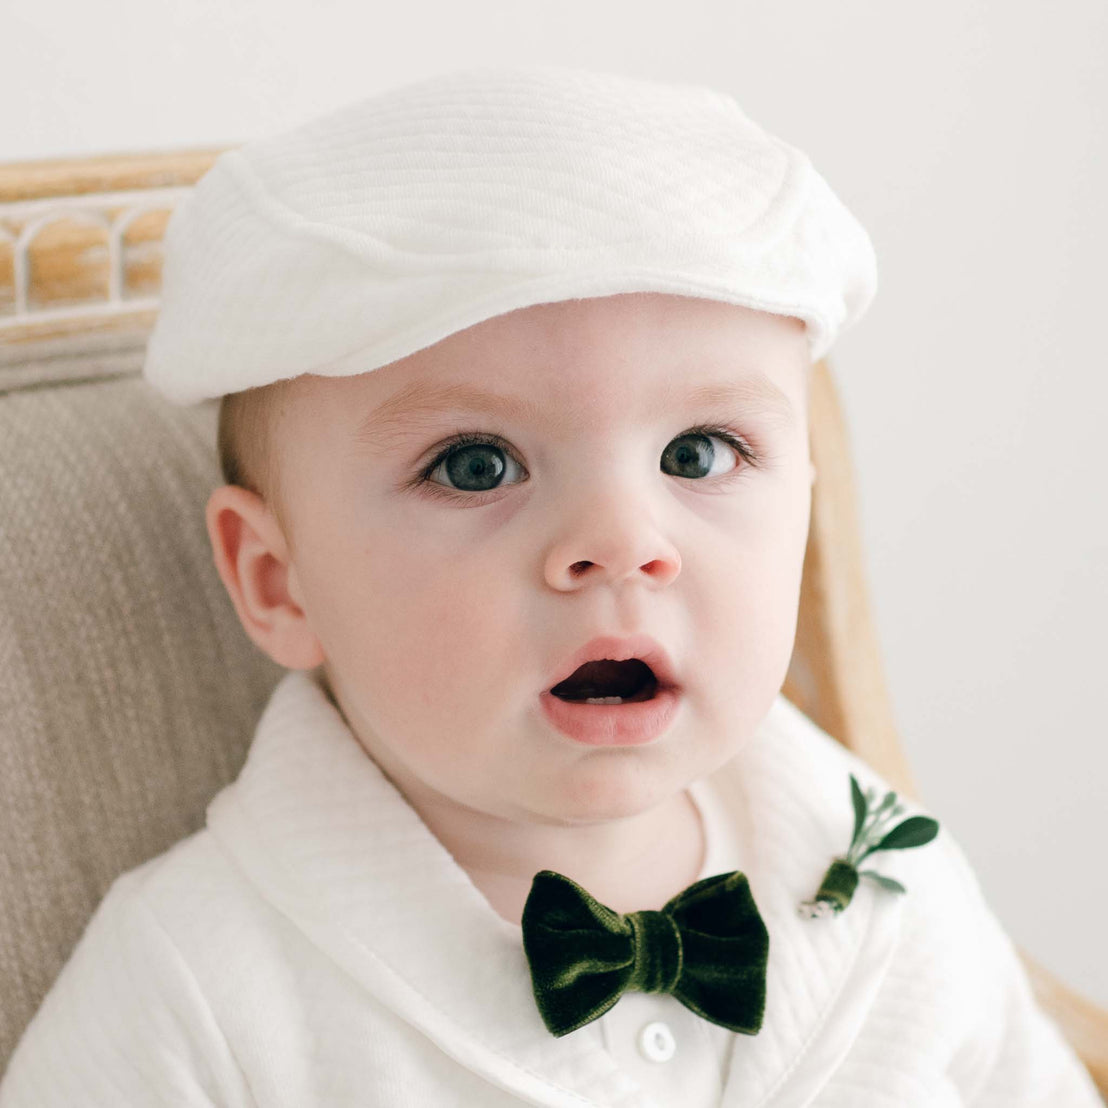 A baby with bright blue eyes and an open mouth wears a white christening outfit with a green bow tie and the Noah Ivory Newsboy Cap, sitting against a light background.